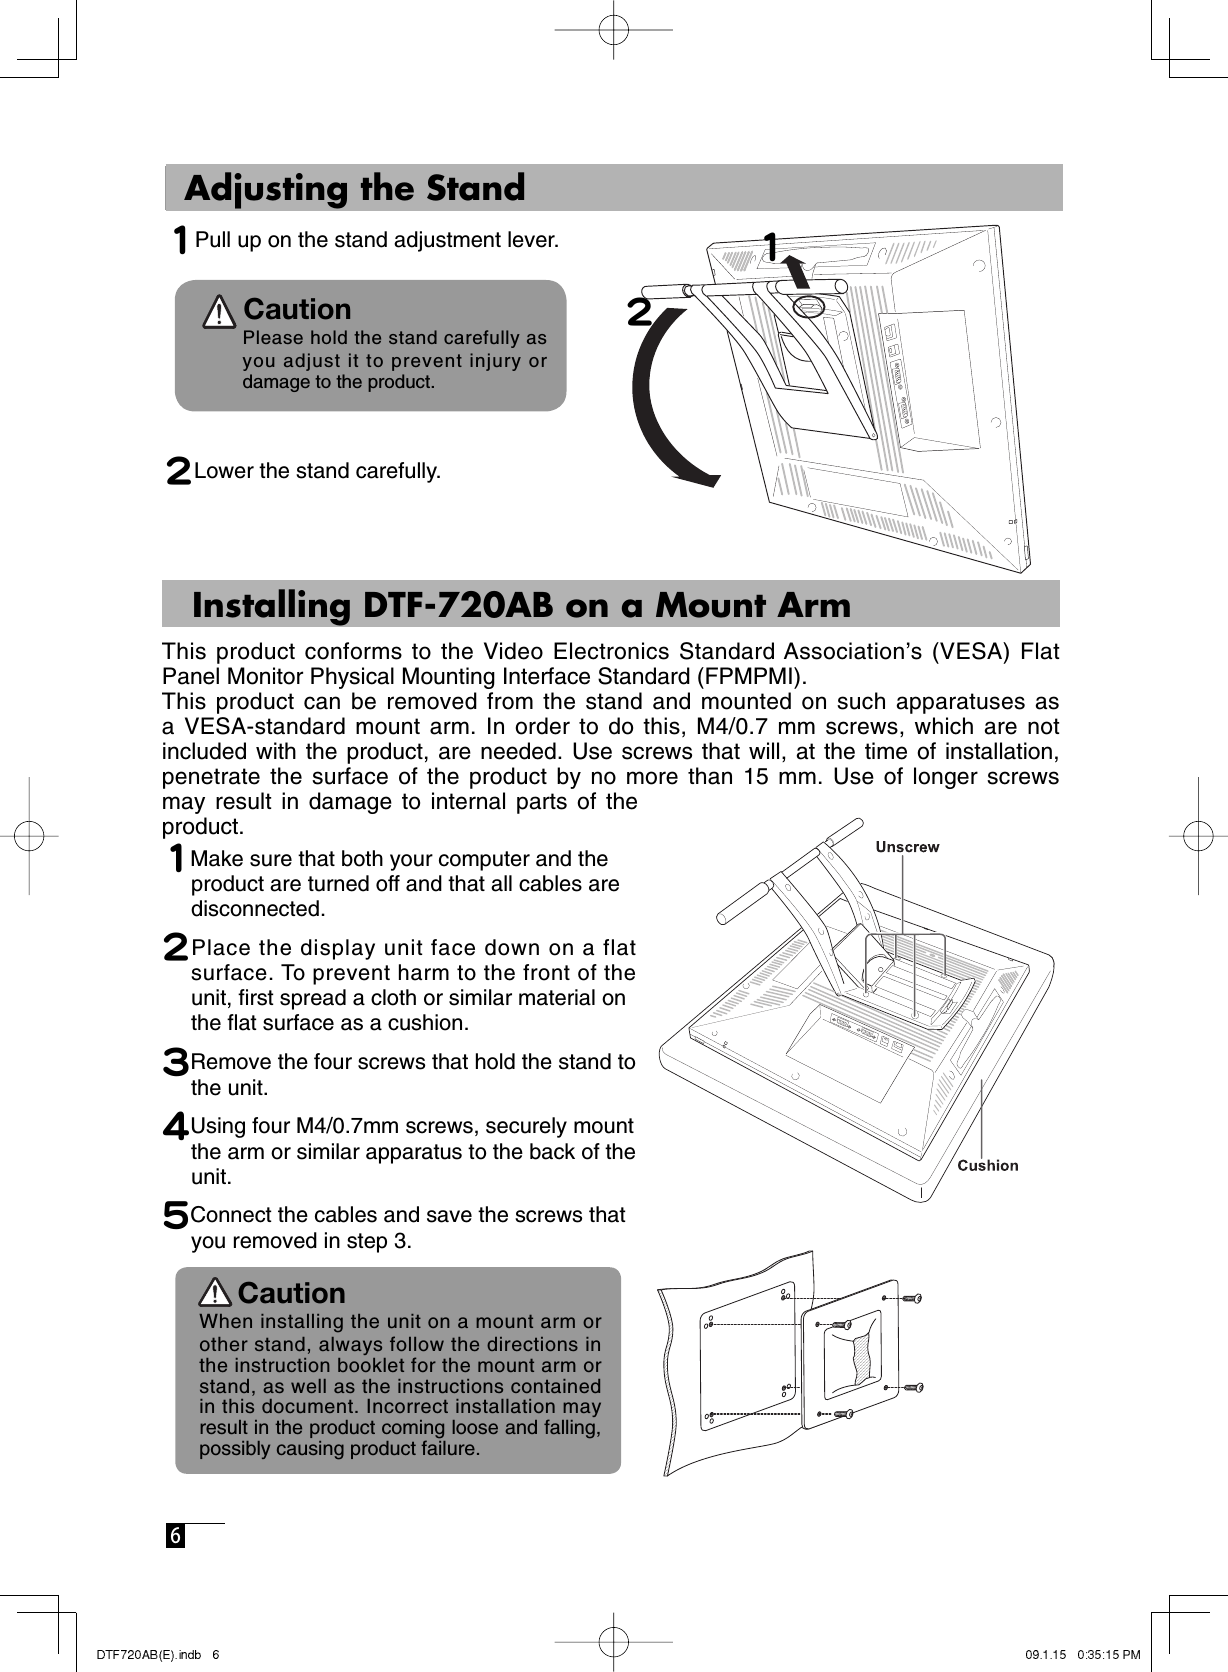  6    Adjusting the Stand1 Pull up on the stand adjustment lever.             Please hold the stand carefully as     you adjust it to prevent injury or     damage to the product.2 Lower the stand carefully.12Caution    Installing DTF-720AB on a Mount ArmThis product conforms to the Video Electronics Standard Association’s (VESA) Flat Panel Monitor Physical Mounting Interface Standard (FPMPMI). This product can be removed from the stand and mounted on such apparatuses as a VESA-standard mount arm. In order to do this, M4/0.7 mm screws, which are not included with the product, are needed. Use screws that will, at the time of installation, penetrate the surface of the product by no more than 15 mm. Use of longer screws may result in damage to internal parts of the product. 1Make sure that both your computer and the  product are turned off and that all cables are  disconnected.2Place the display unit face down on a flat surface. To prevent harm to the front of the unit, ﬁ rst spread a cloth or similar material on  the ﬂ at surface as a cushion.3Remove the four screws that hold the stand to the unit.  4Using four M4/0.7mm screws, securely mount  the arm or similar apparatus to the back of the unit.5Connect the cables and save the screws that  you removed in step 3. Caution  When installing the unit on a mount arm or other stand, always follow the directions in the instruction booklet for the mount arm or stand, as well as the instructions contained in this document. Incorrect installation may result in the product coming loose and falling,  possibly causing product failure. 